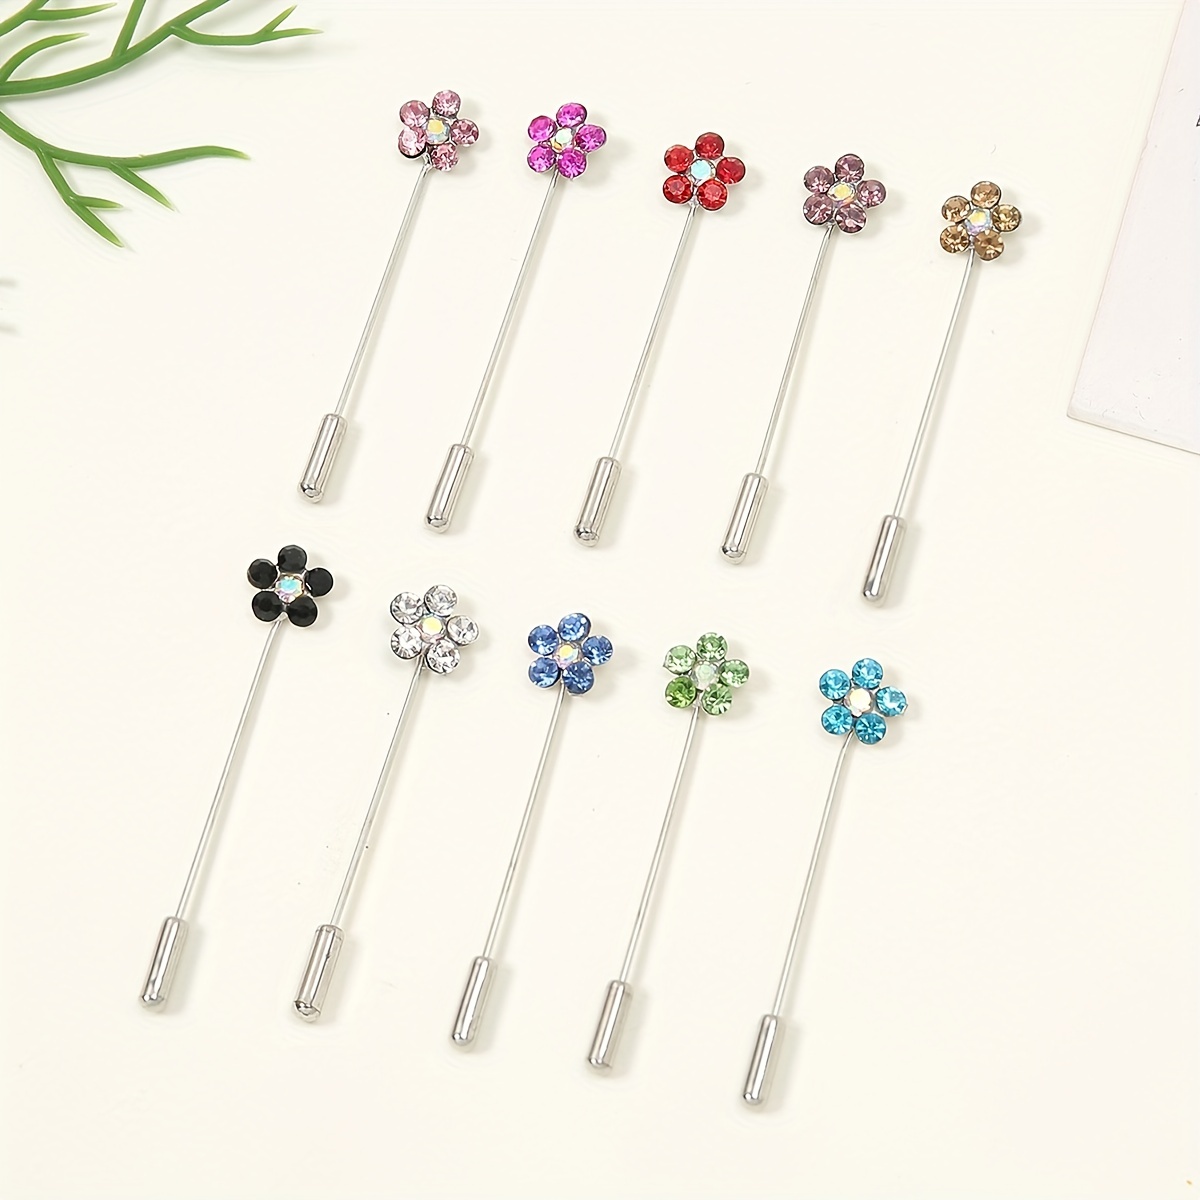 12 pcs Fancy Plain Colorful Scarves Safety Pin,Scarf Pins,Hijab Pins,Brooch  Pins